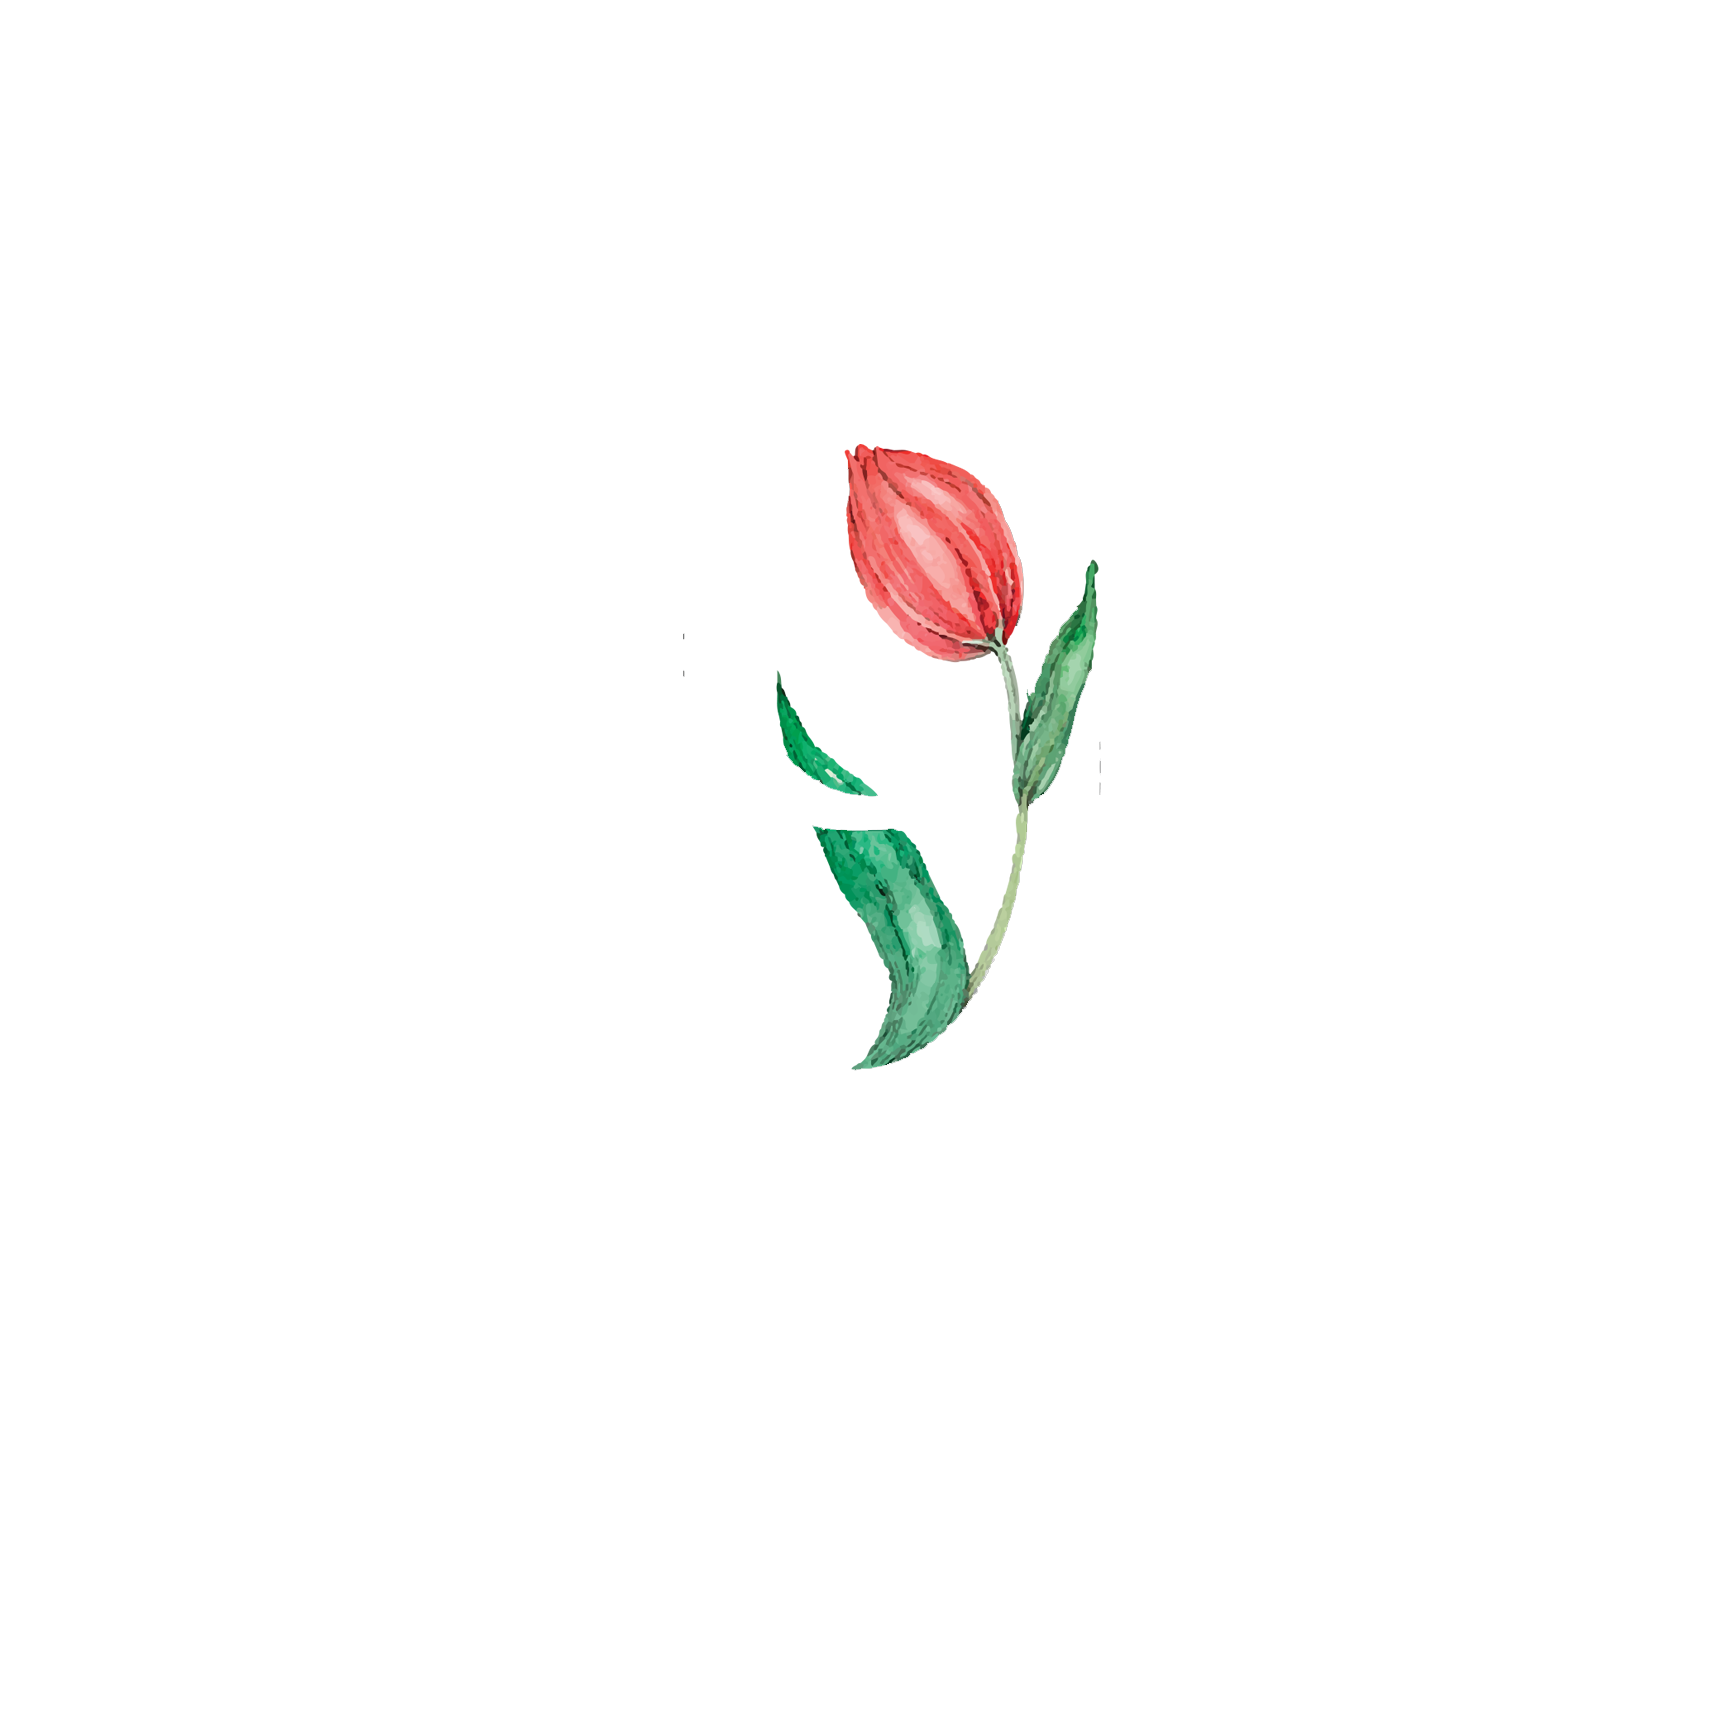 Click to read Day 9 - Body